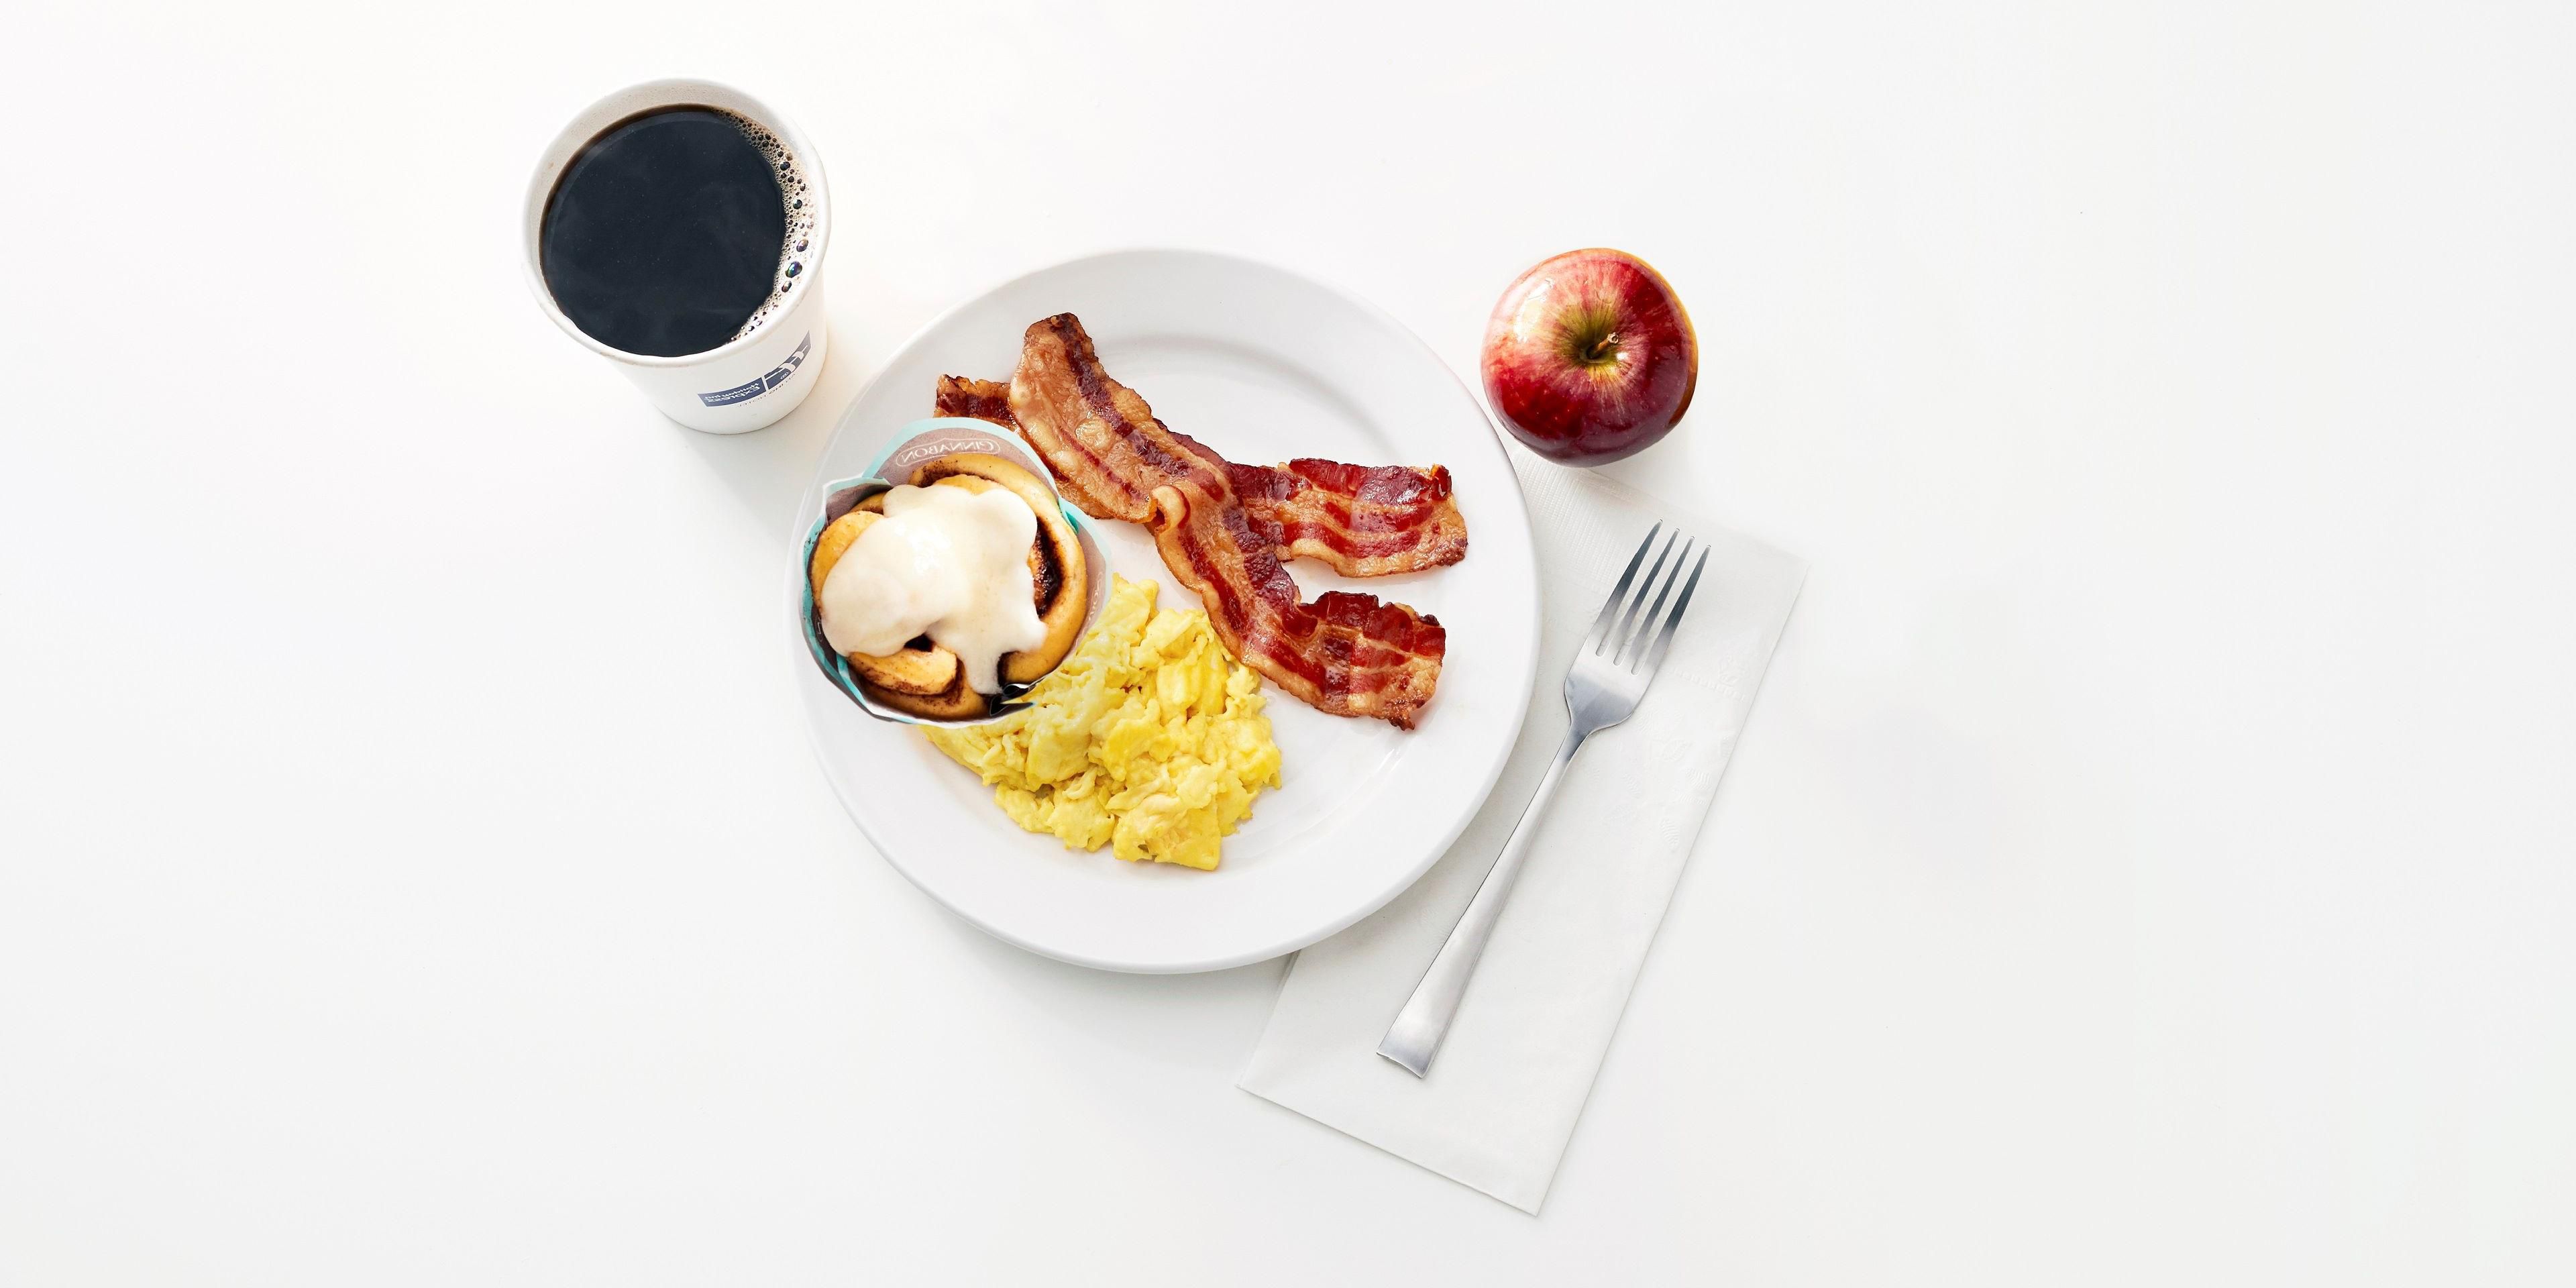 Kick start your day with our Express Start Breakfast, with grab ‘n’ go options and favorites such as eggs and bacon, hot pancakes, our signature cinnamon rolls and fresh coffee. Offered from 6:00am to 9:30am.